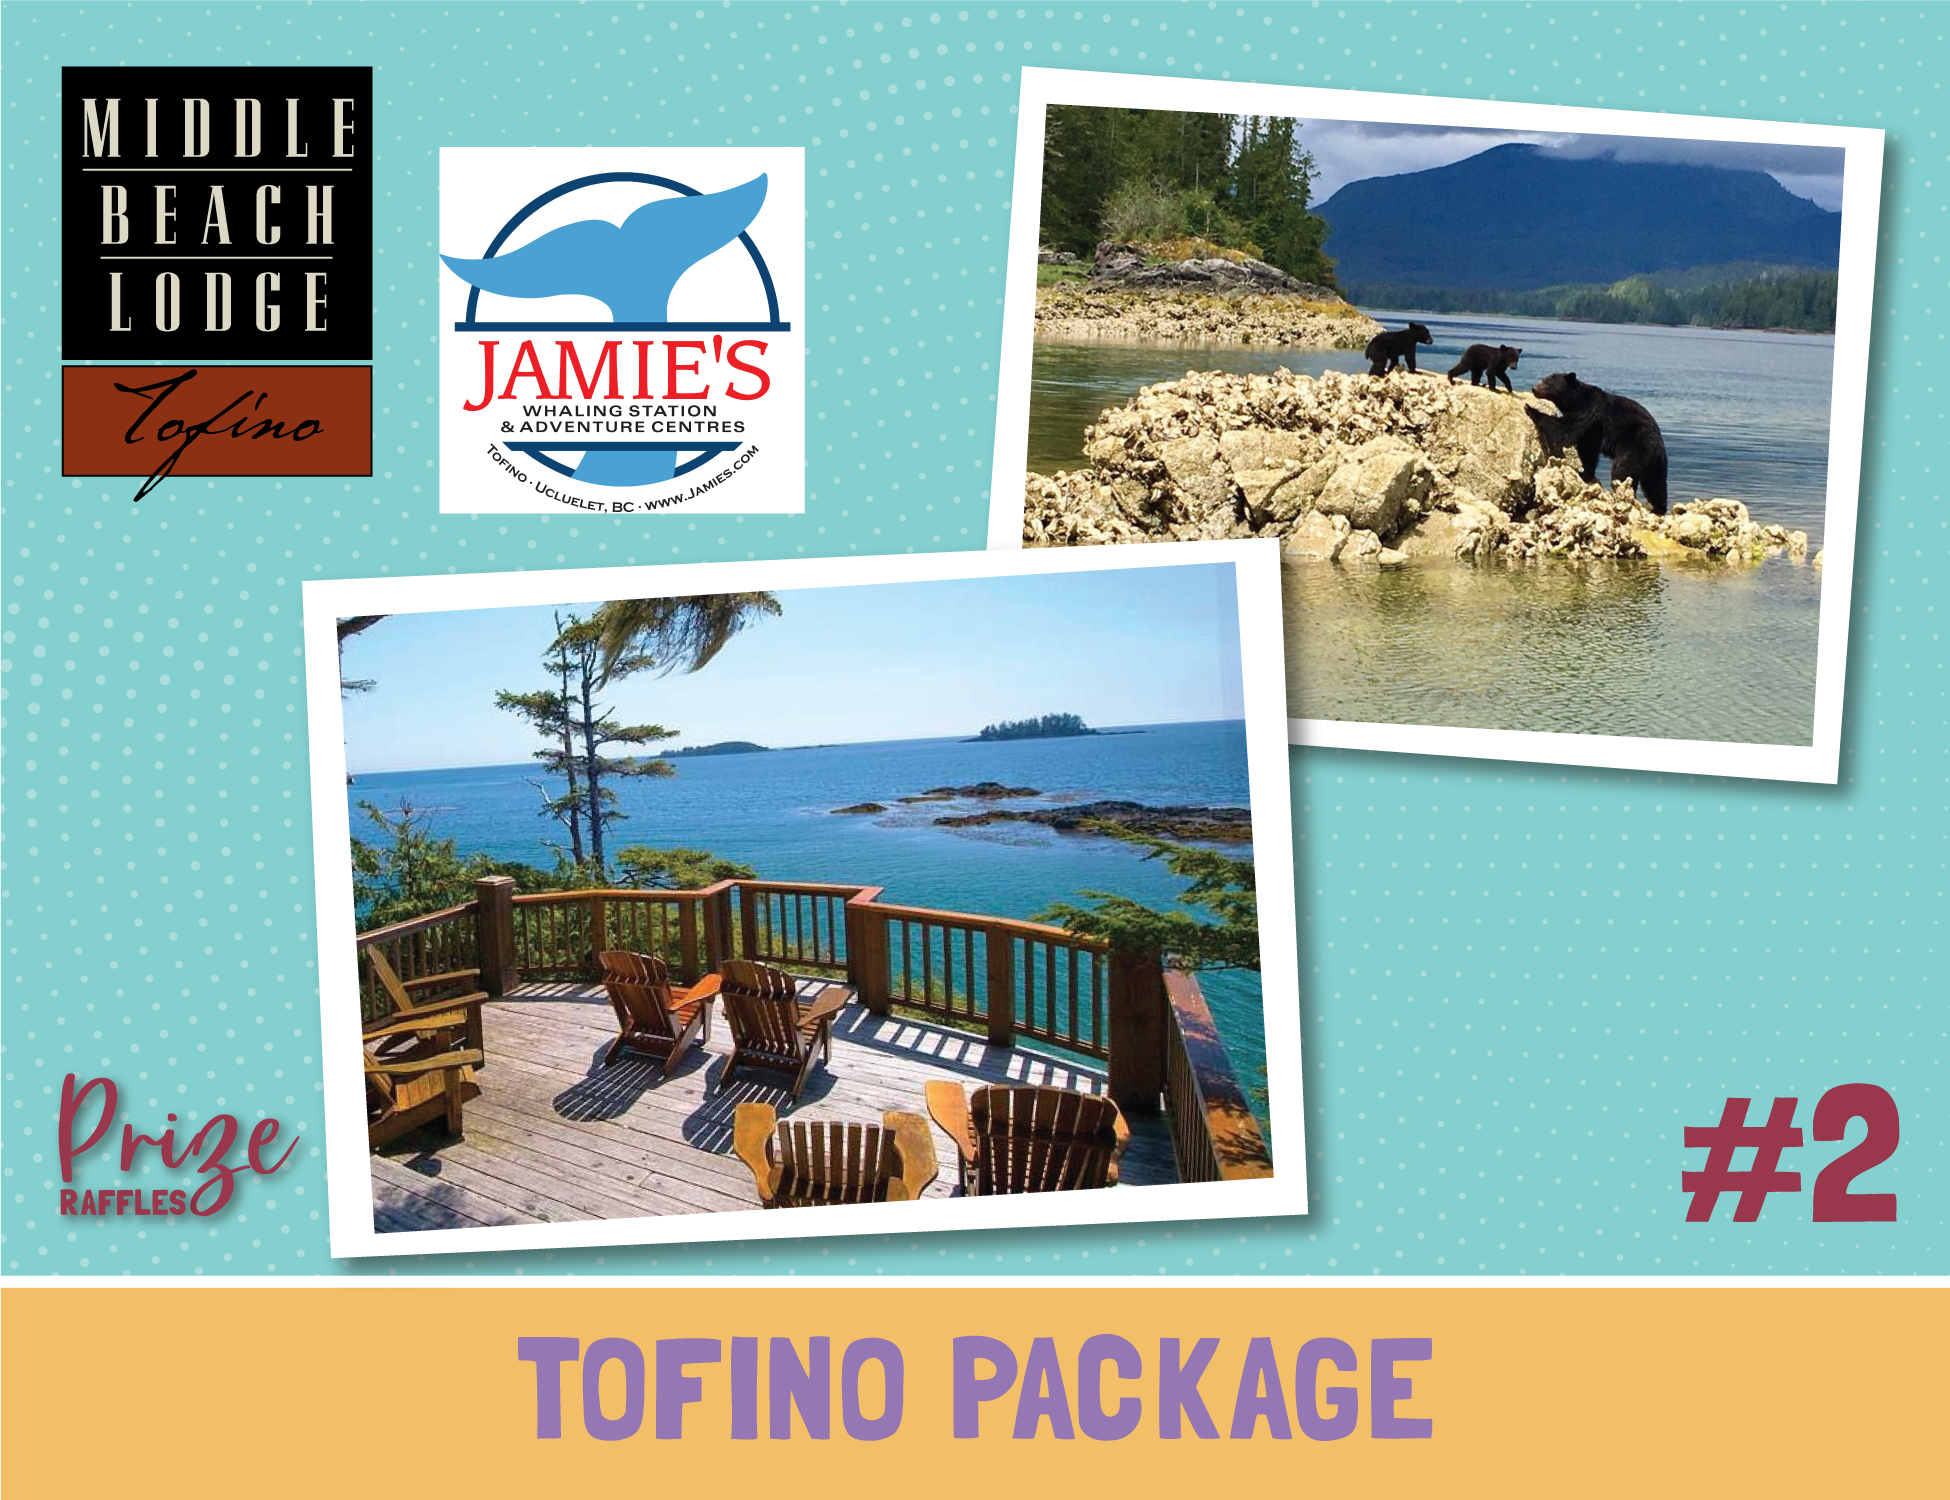 Tofino Package Raffle Prize #2